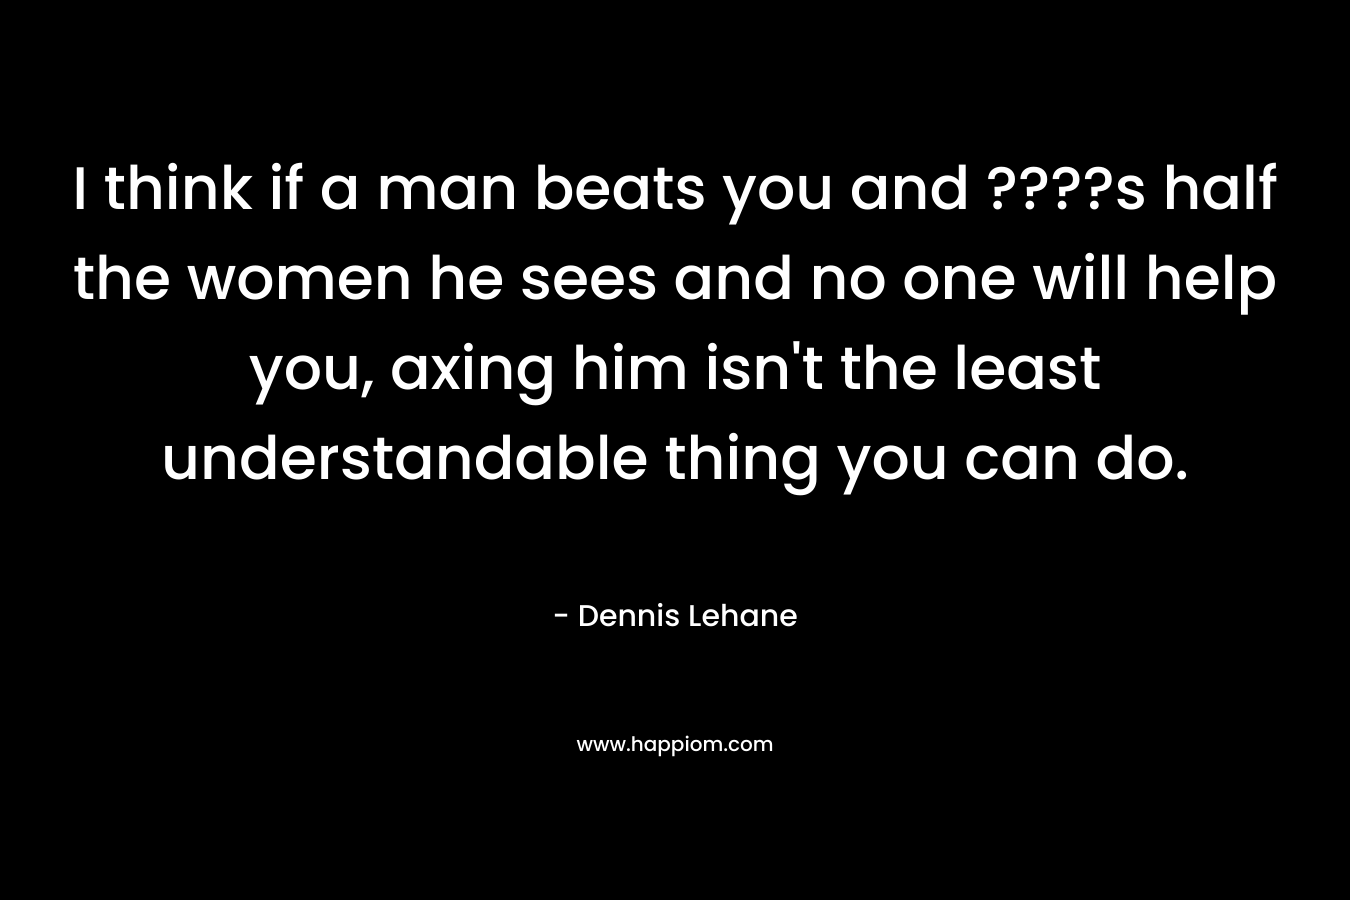 I think if a man beats you and ????s half the women he sees and no one will help you, axing him isn’t the least understandable thing you can do. – Dennis Lehane